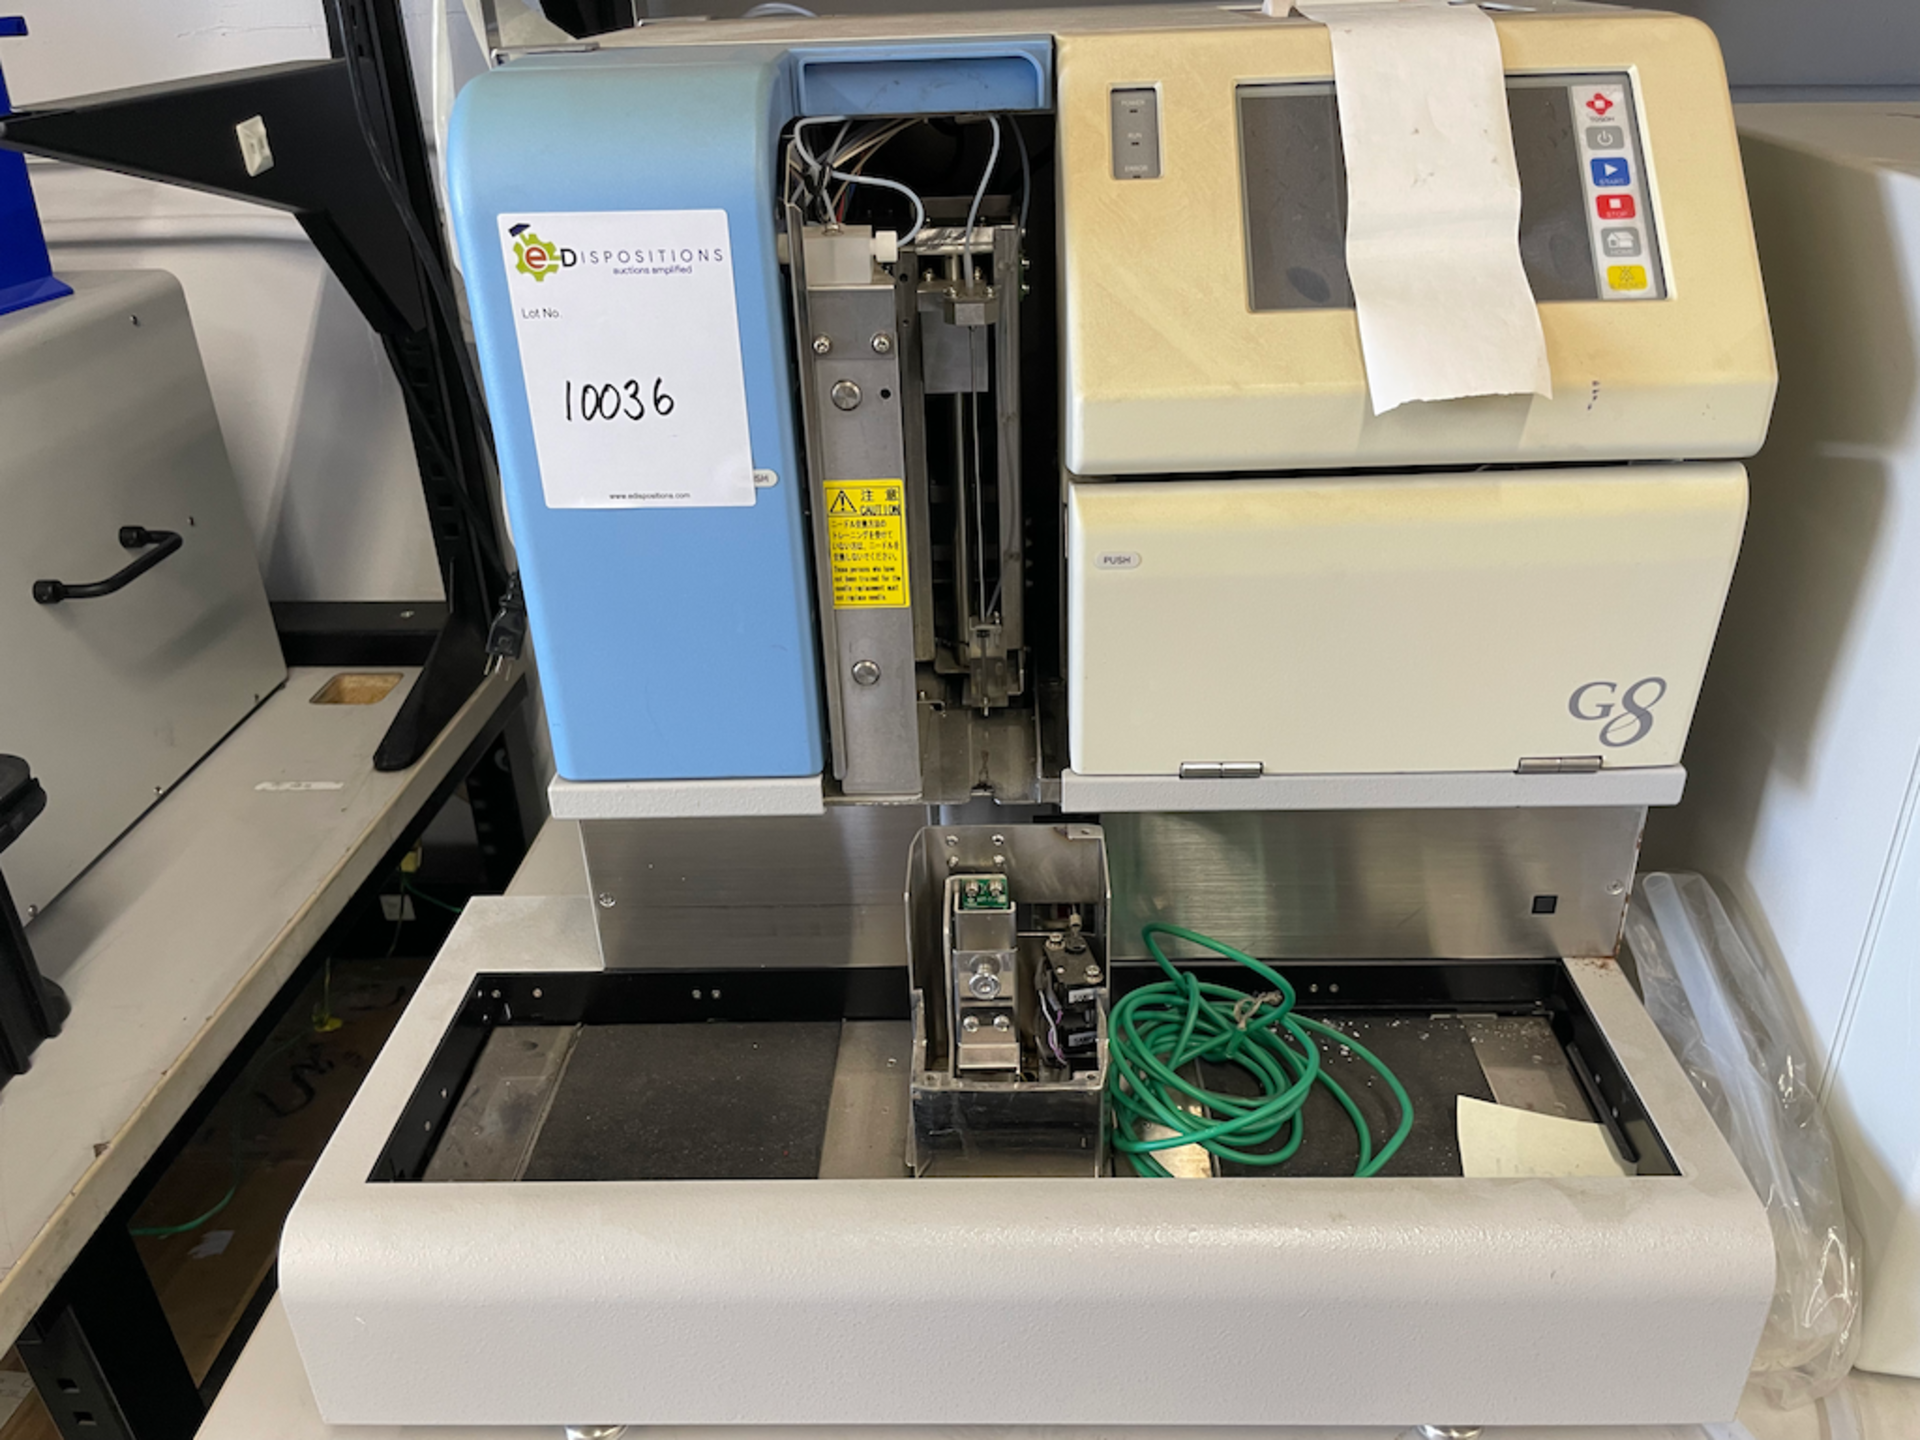 TOSOH G8 HPLC ANALYZER - LOCATED AT 1218 ALDERWOOD AVE. SUNNYVALE, CA 94089